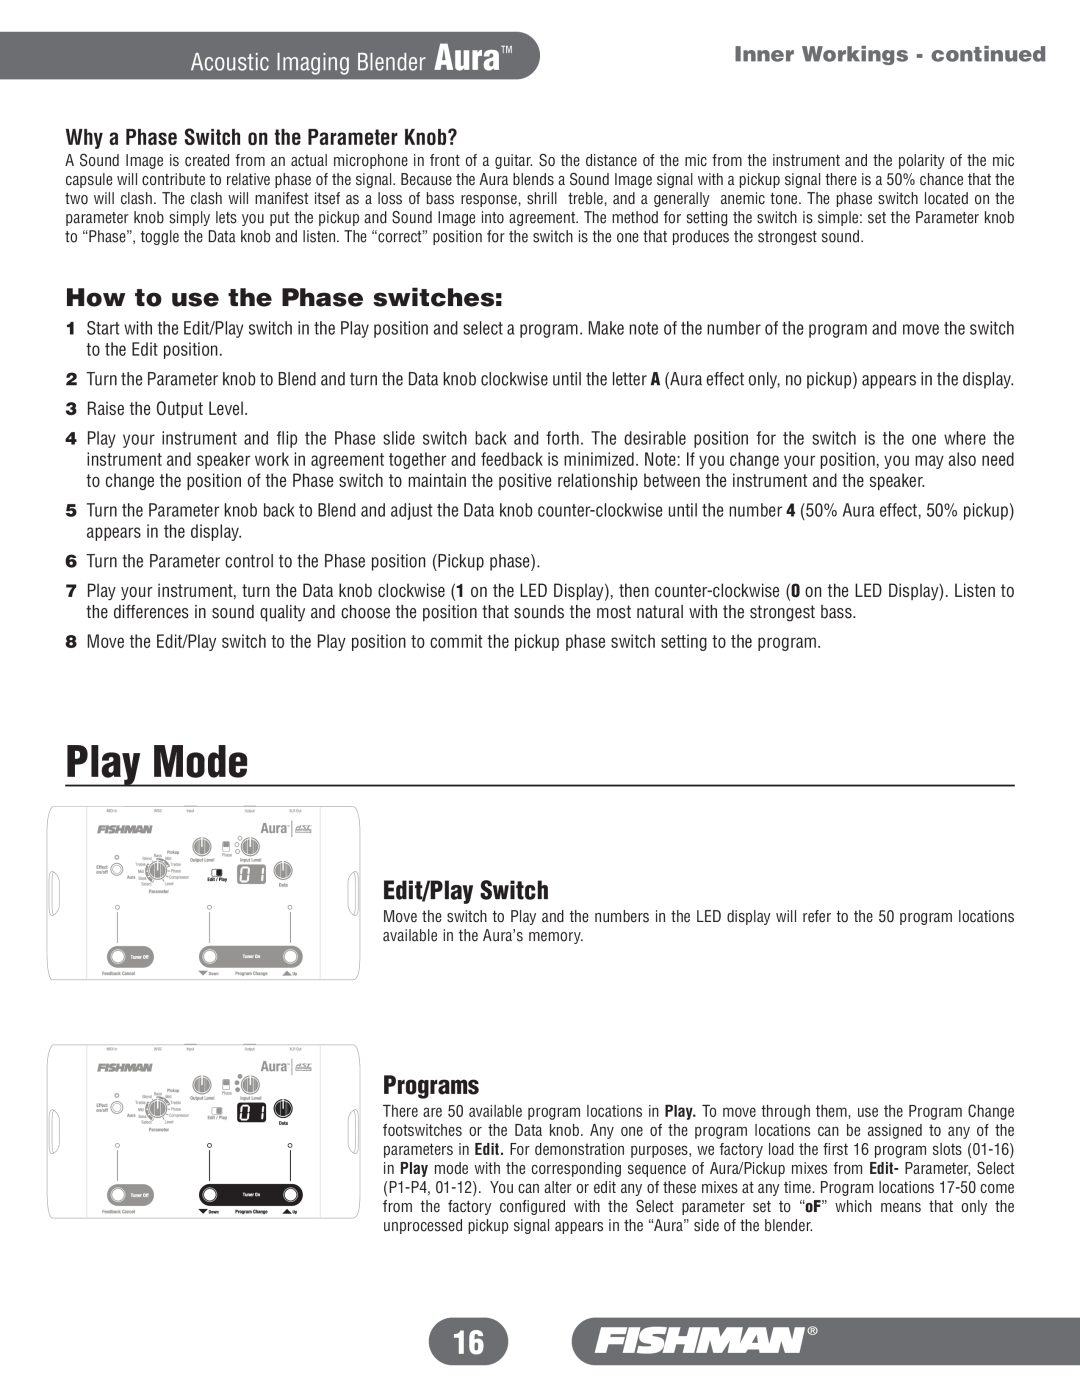 Fishman Aura manual Play Mode, How to use the Phase switches, Edit/Play Switch, Programs, Inner Workings - continued 